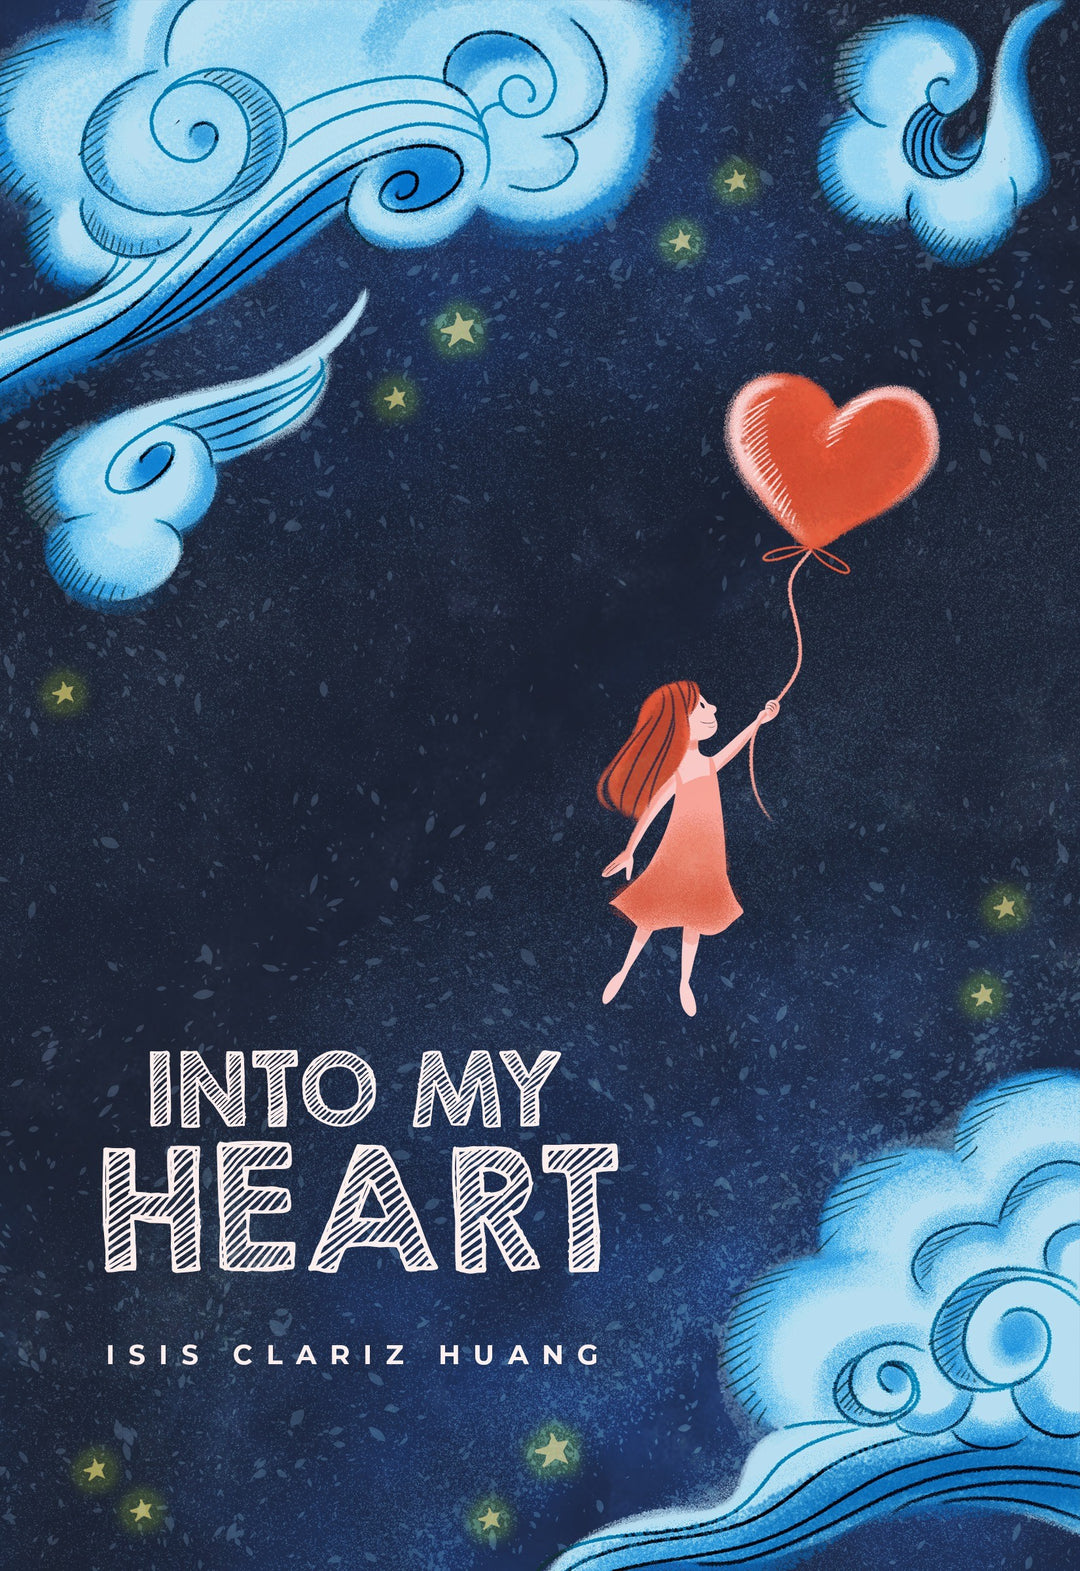 Into My Heart - A Collection of Love Poems by Isis Clariz Huang Paperback Edition